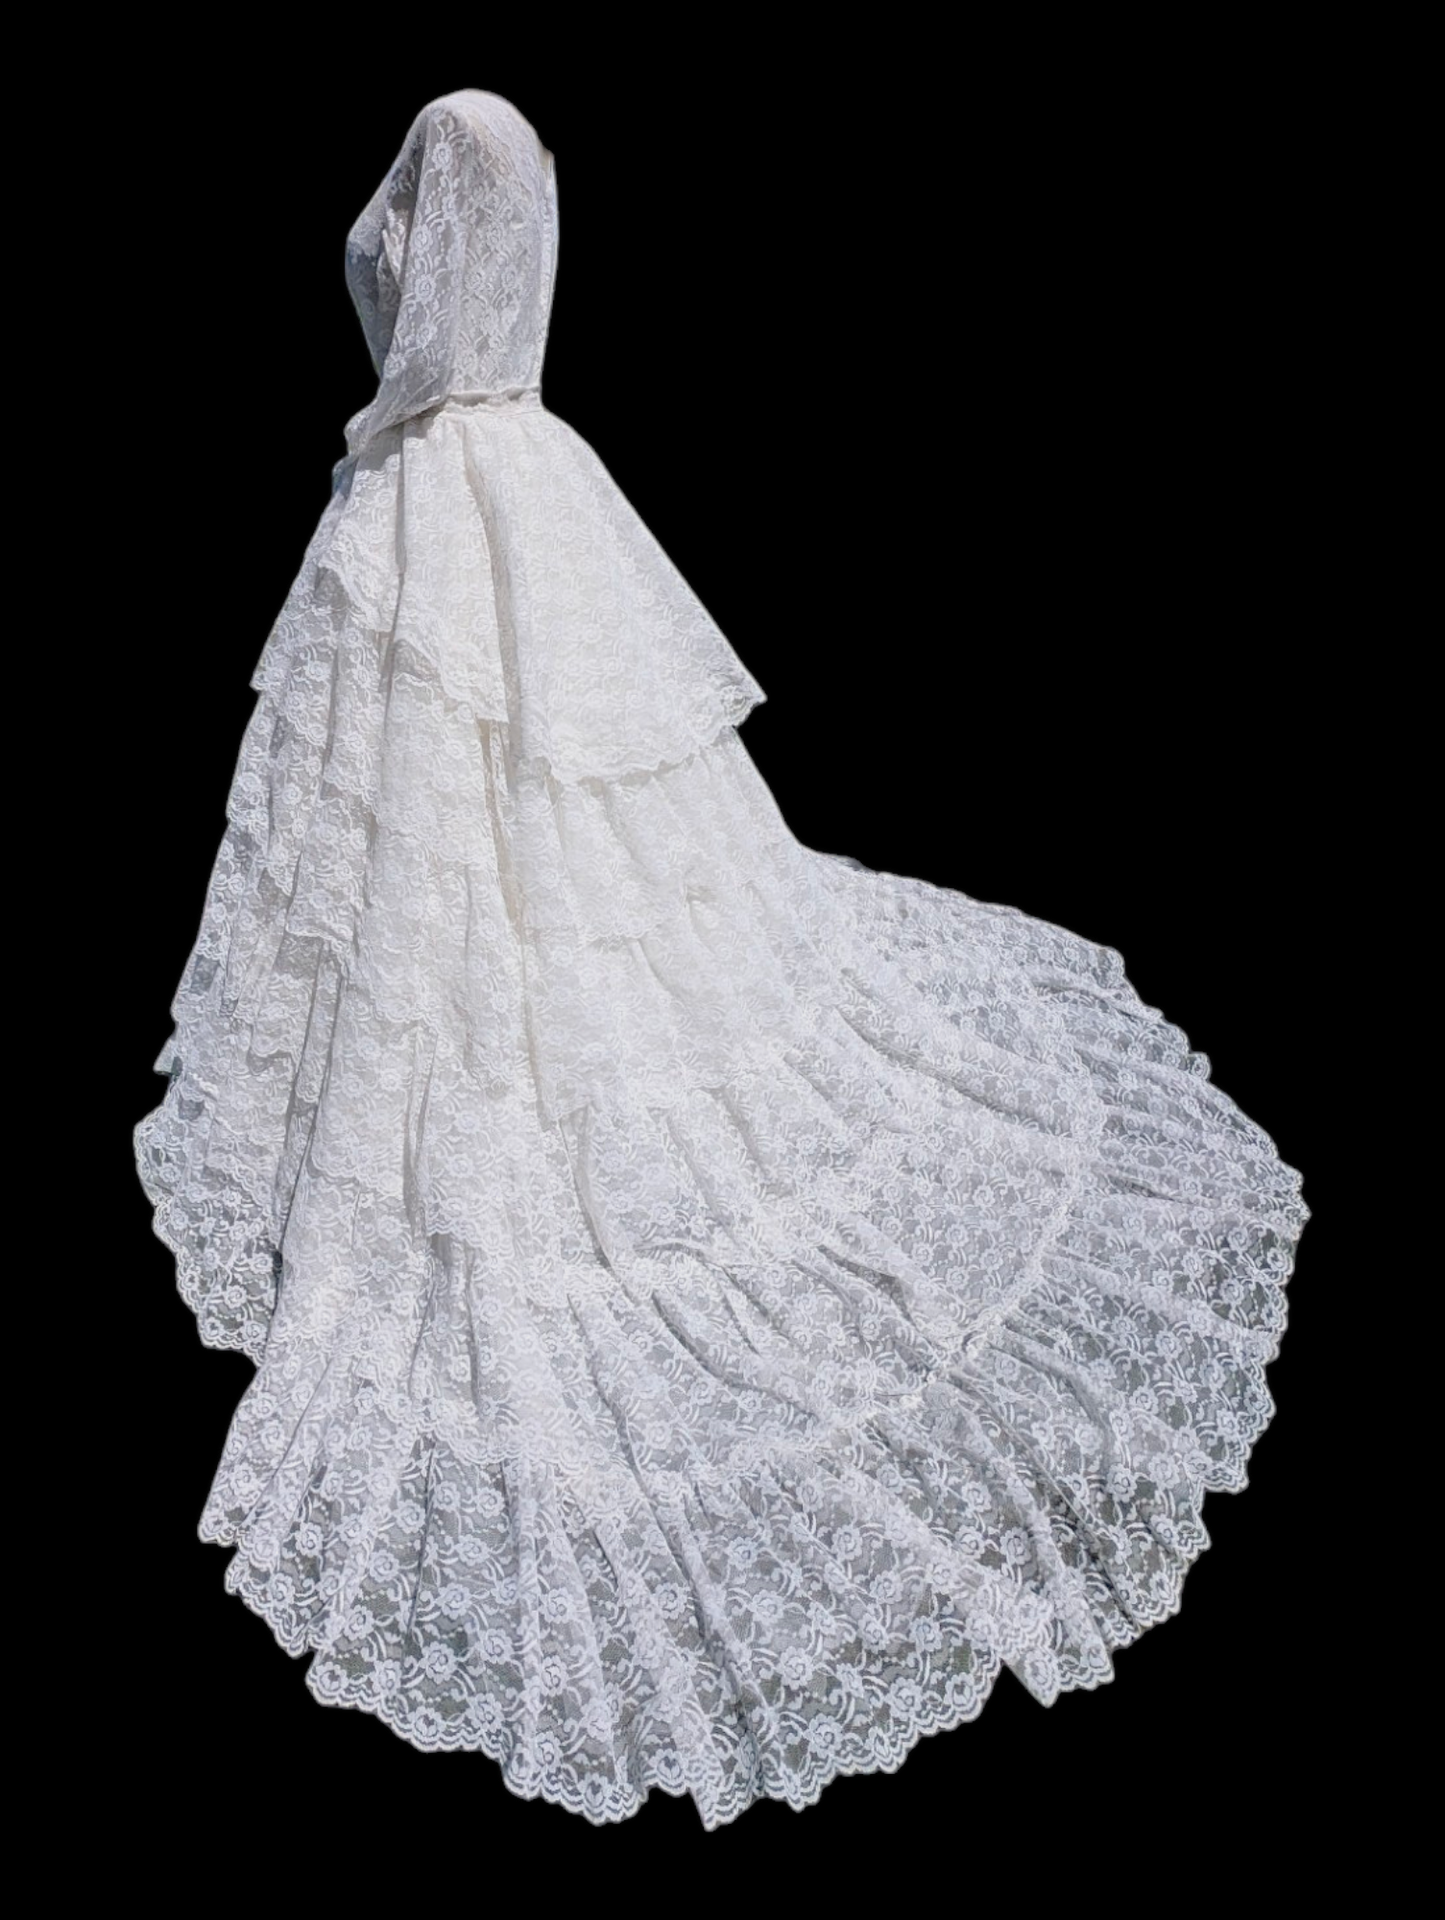 1950s Bright White Ruffled Tiered Wedding Dress with Cupid Lace, Long Sleeves, And Removable Train